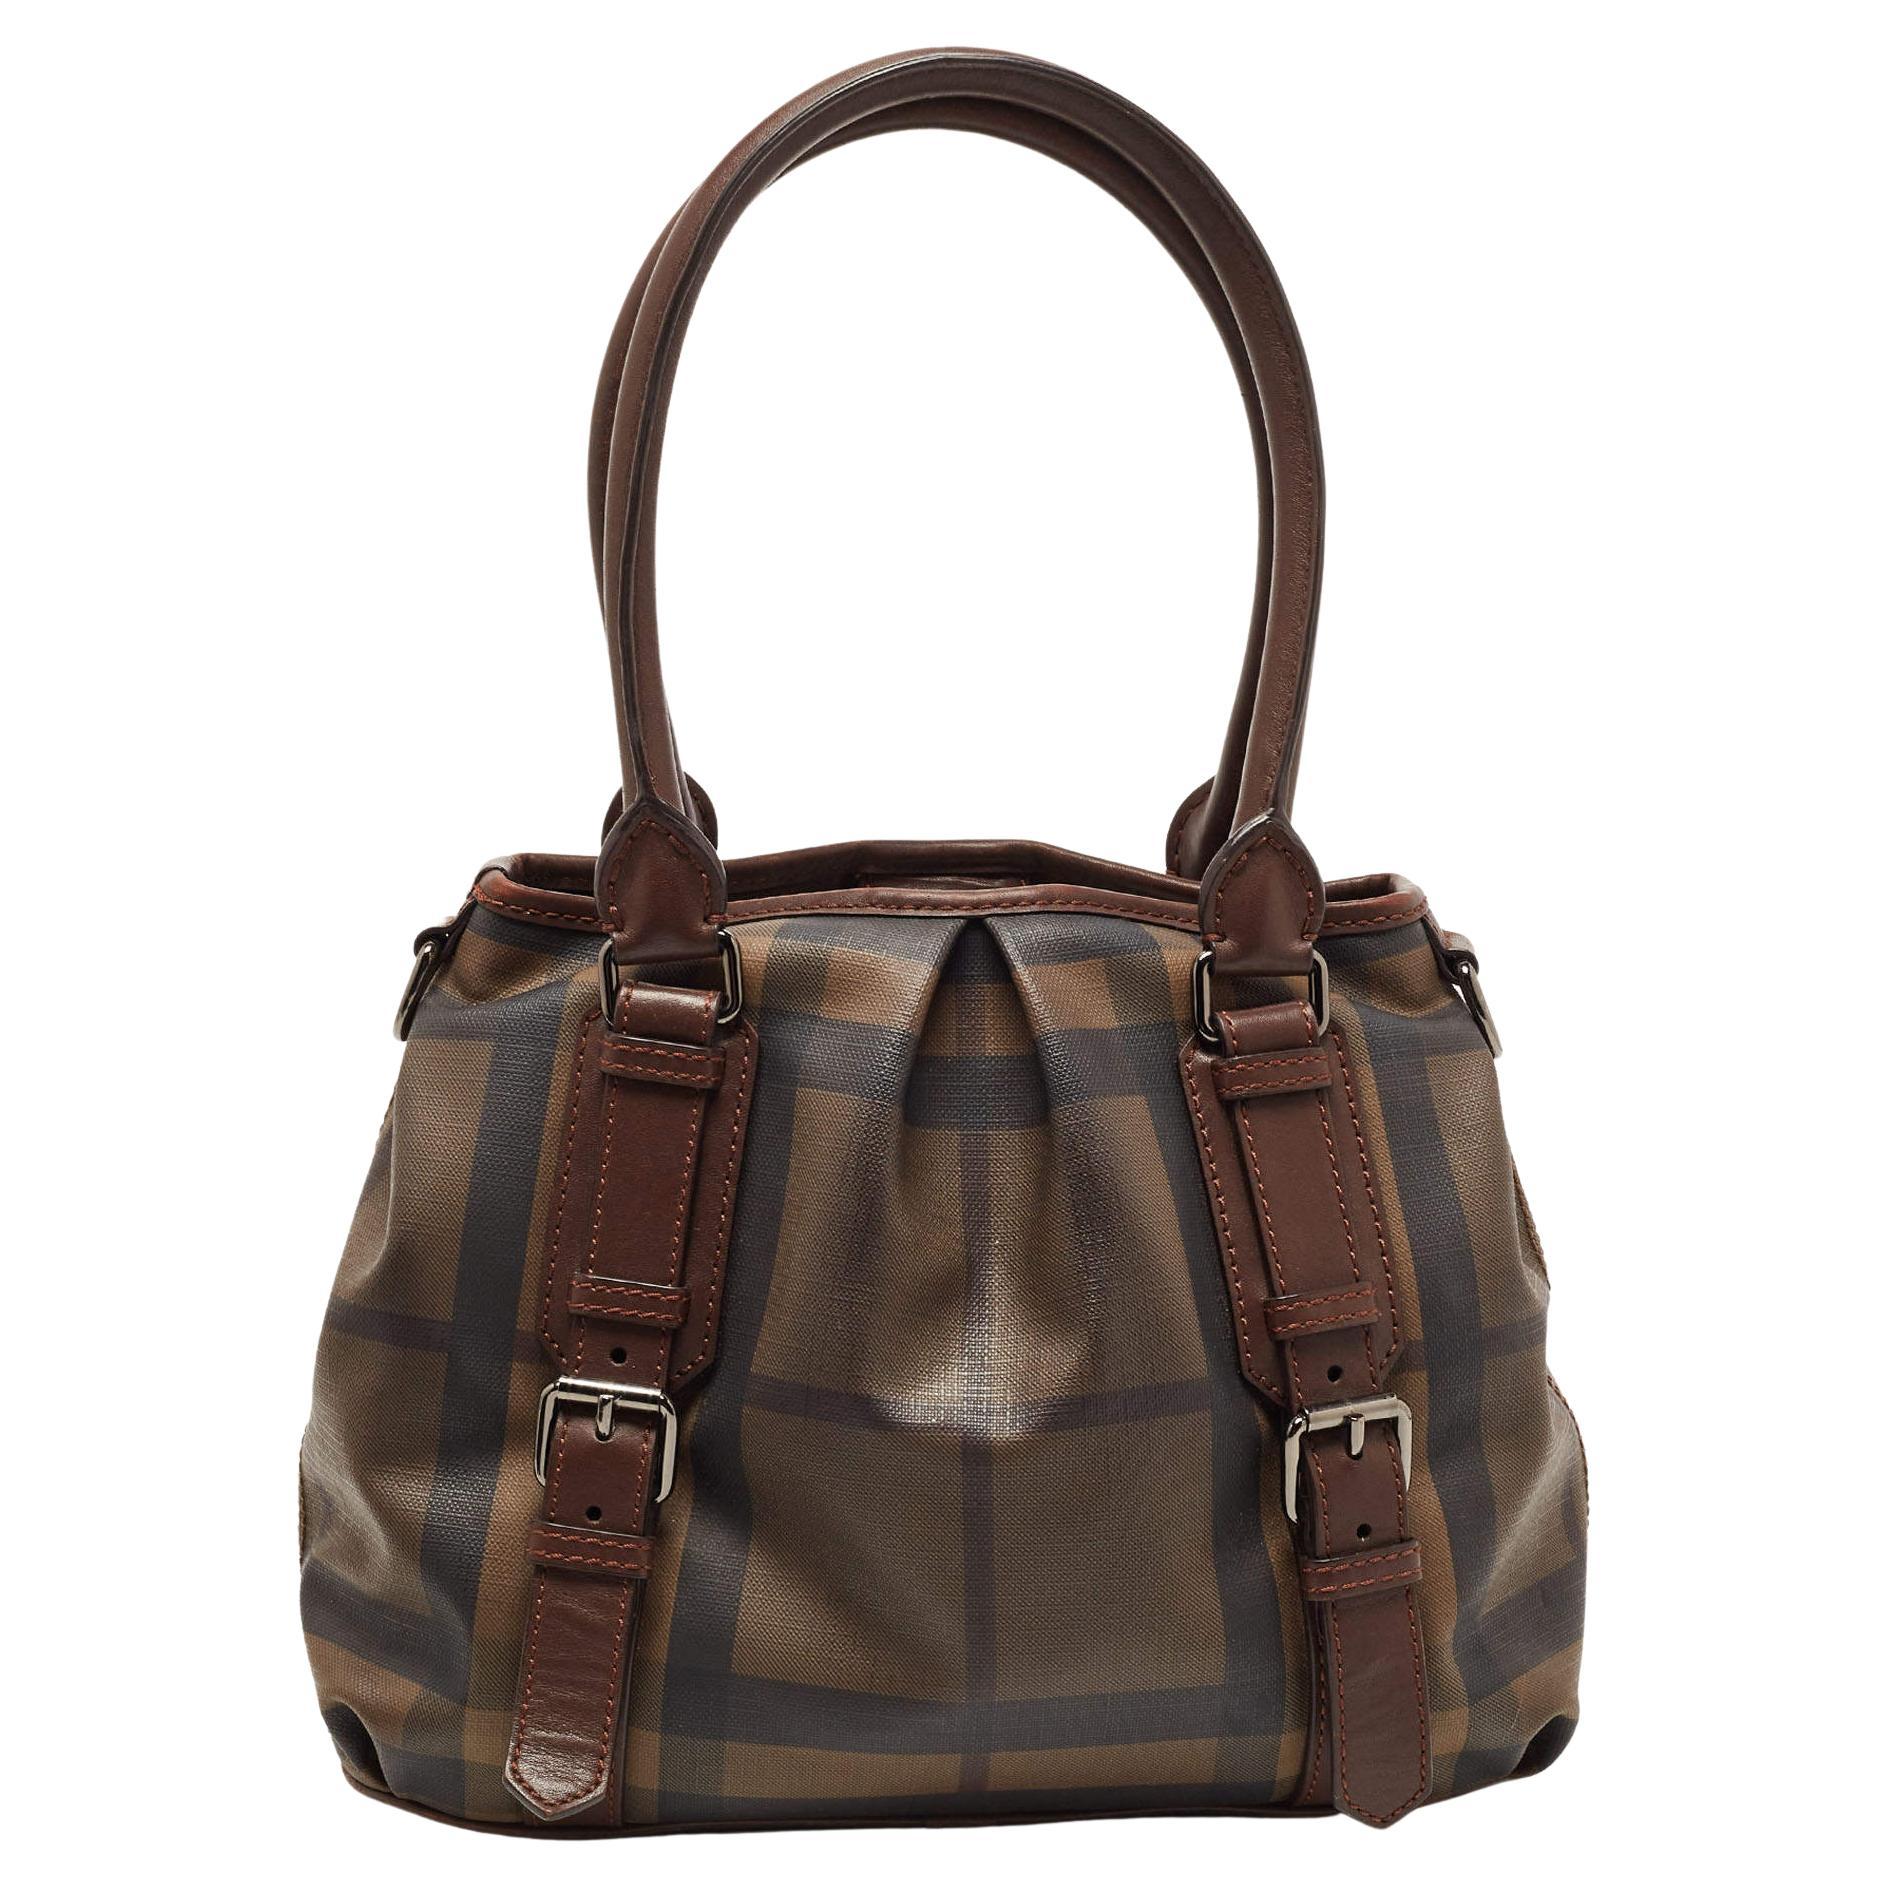 This Northfield tote from Burberry is crafted from signature Smoke check coated canvas and leather. It is equipped with two rolled handles, a detachable shoulder strap, and a well-sized canvas interior to house your belongings. The dark brown shade